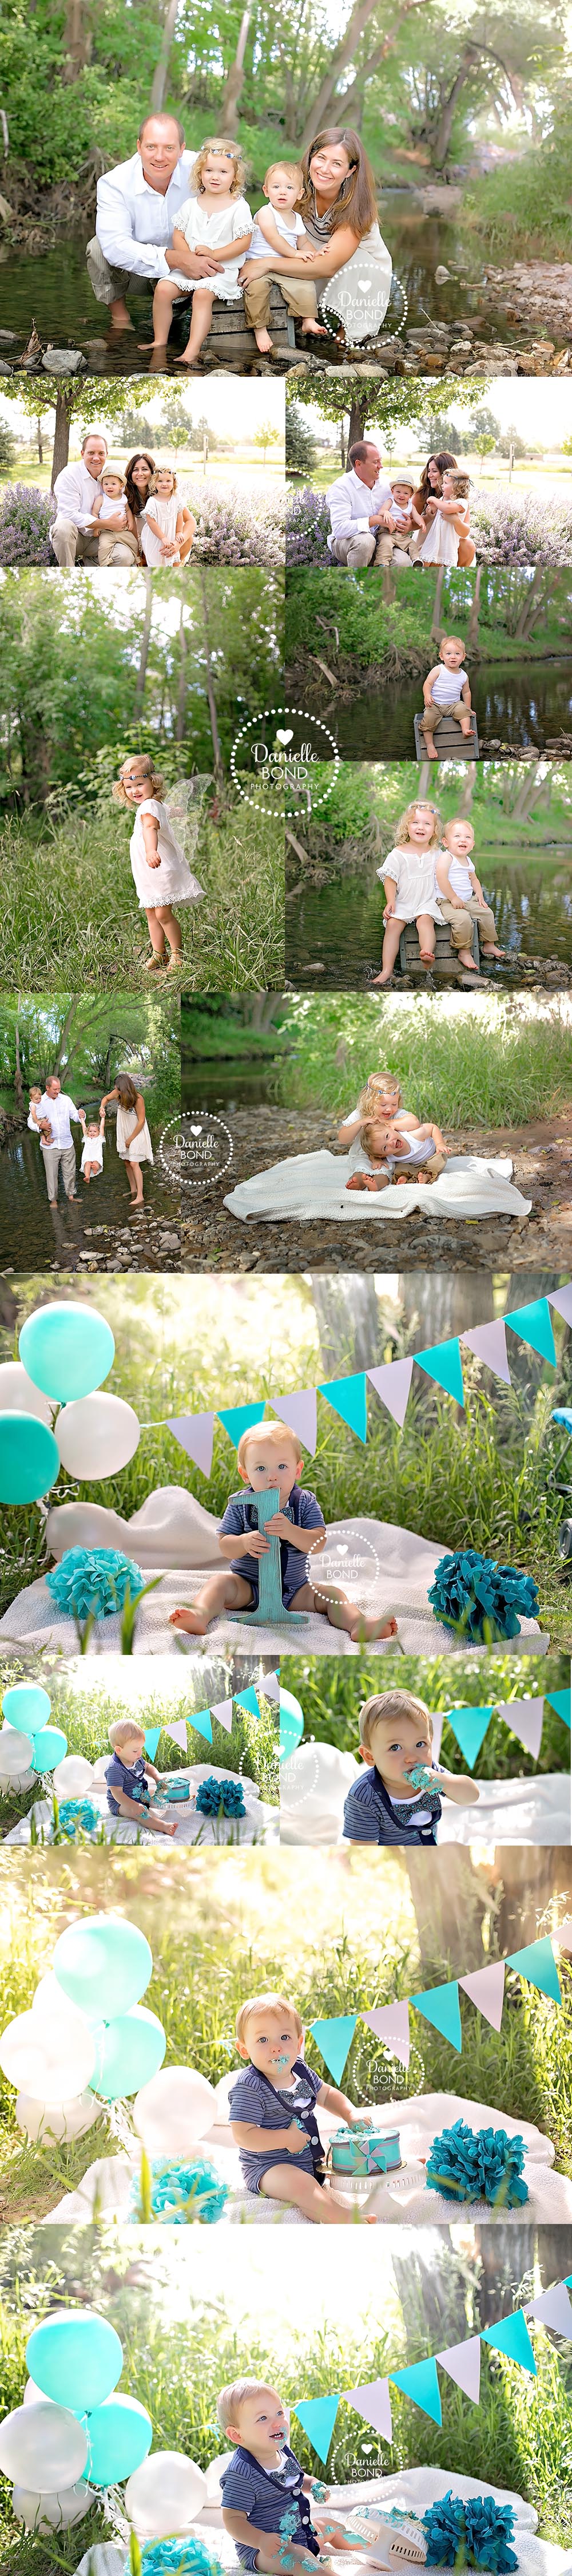 creek family session and grey and blue outdoor cake smash